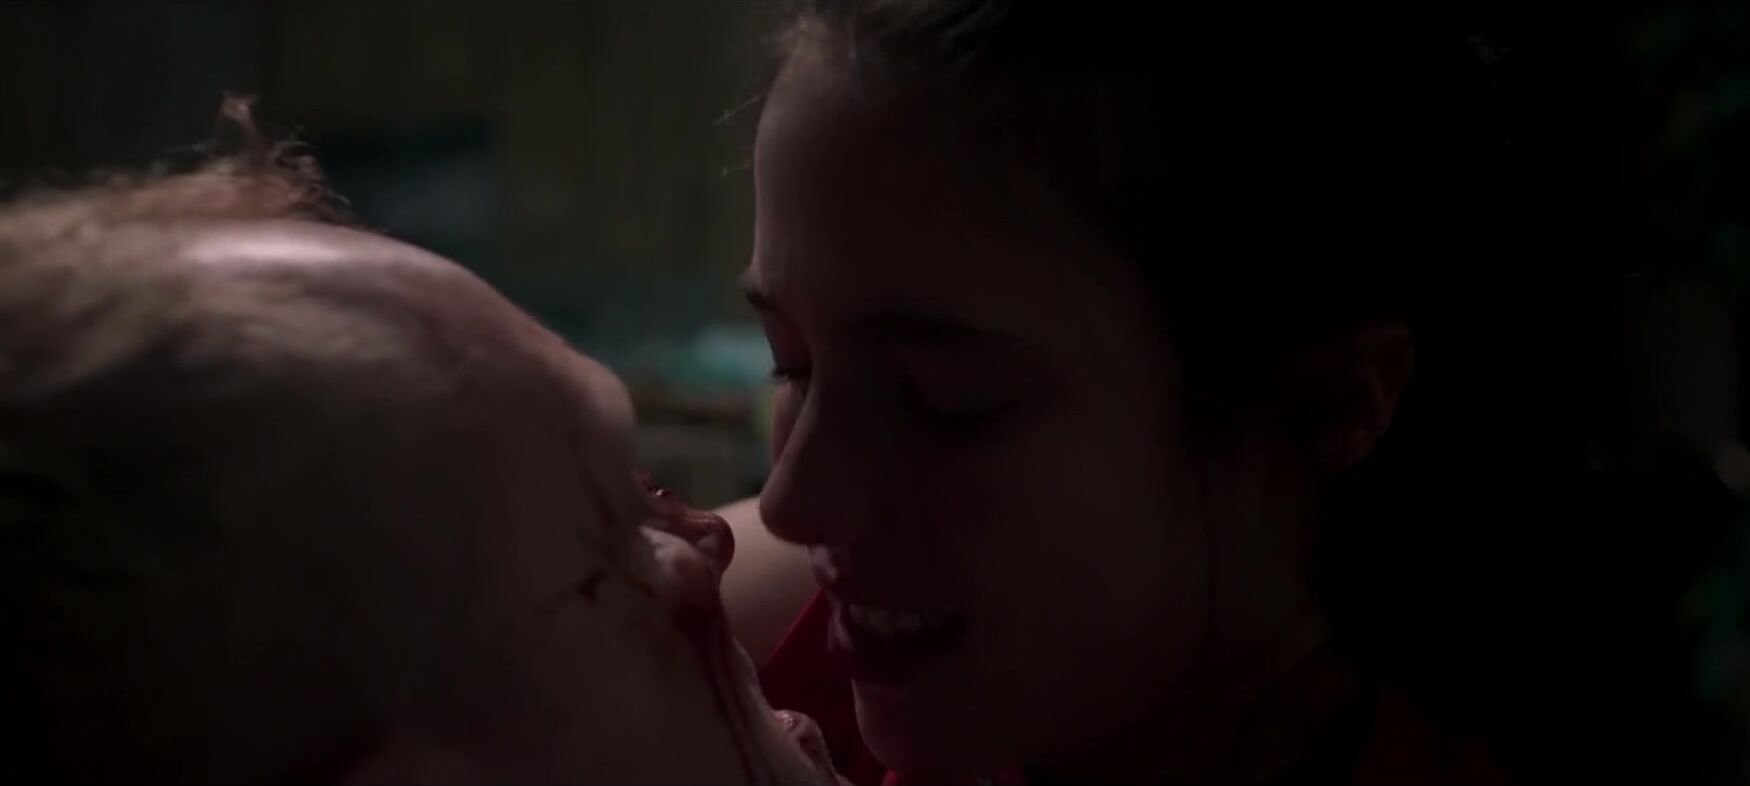 Hair Nude and sex moments of skinny sexual pervert Margaret Qualley from Donnybrook (2018) Dirty Roulette